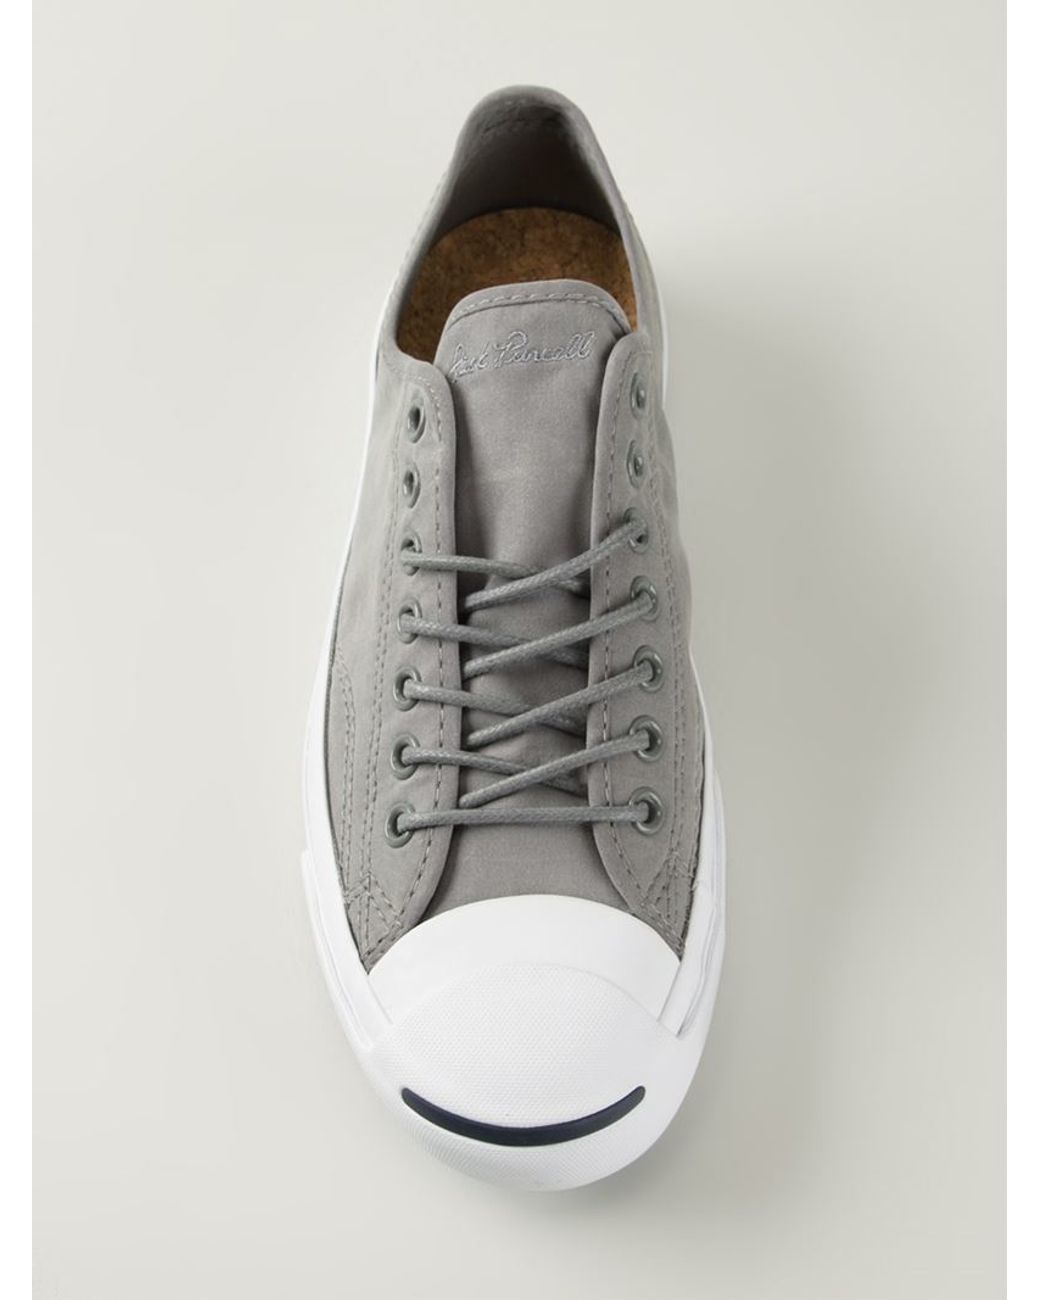 Converse Jack Purcell Signature Sneakers in Gray for Men | Lyst